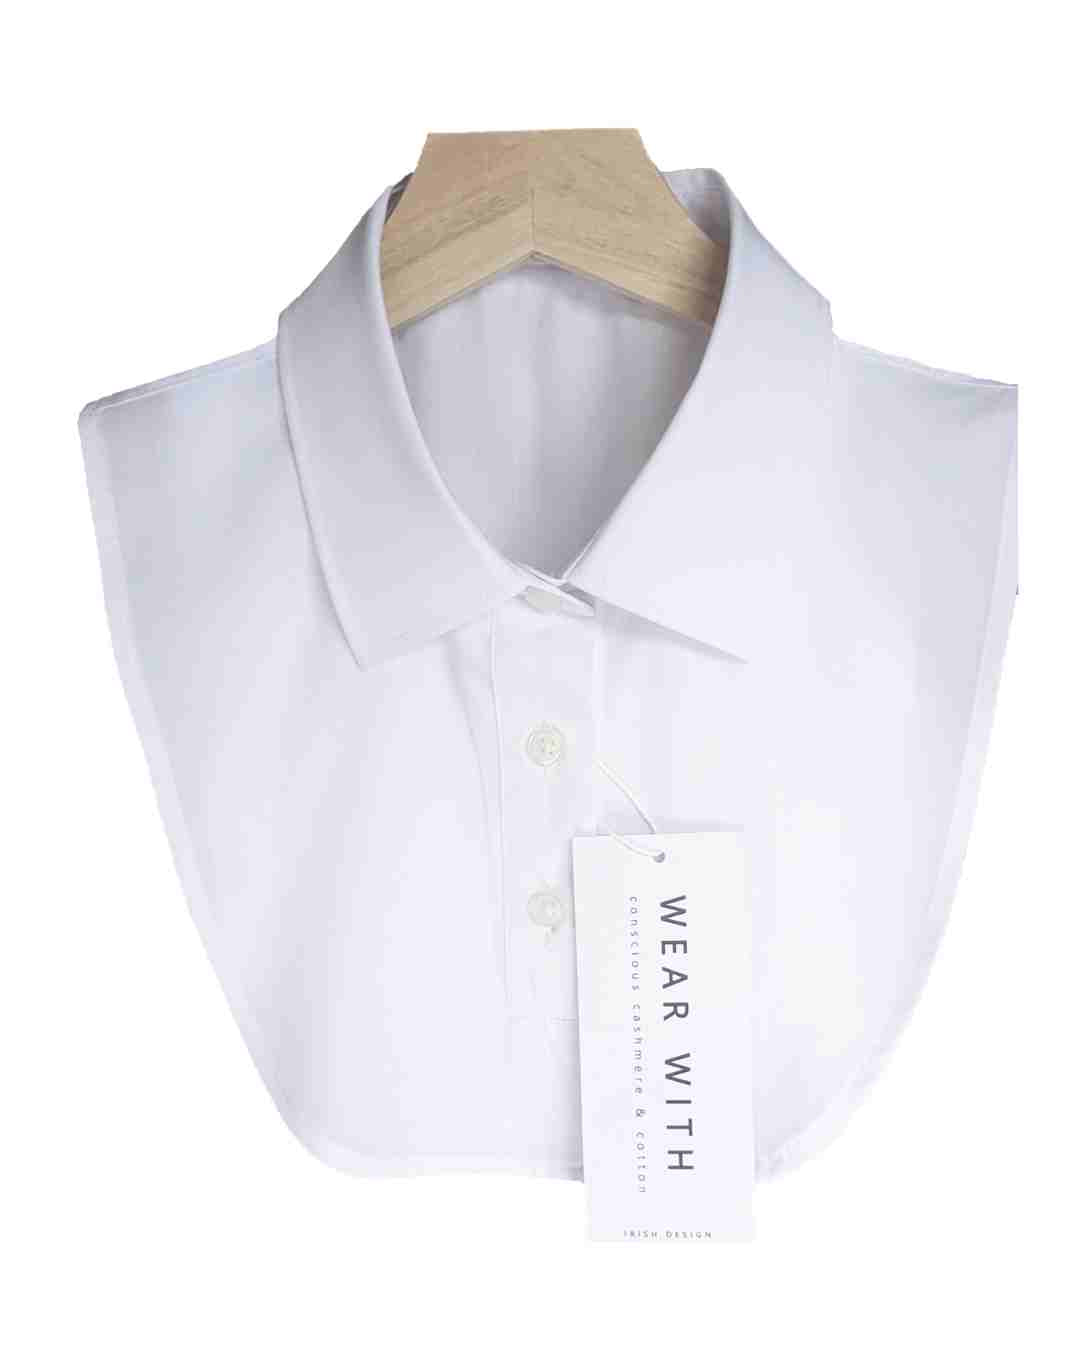 elevate your style shirt collar